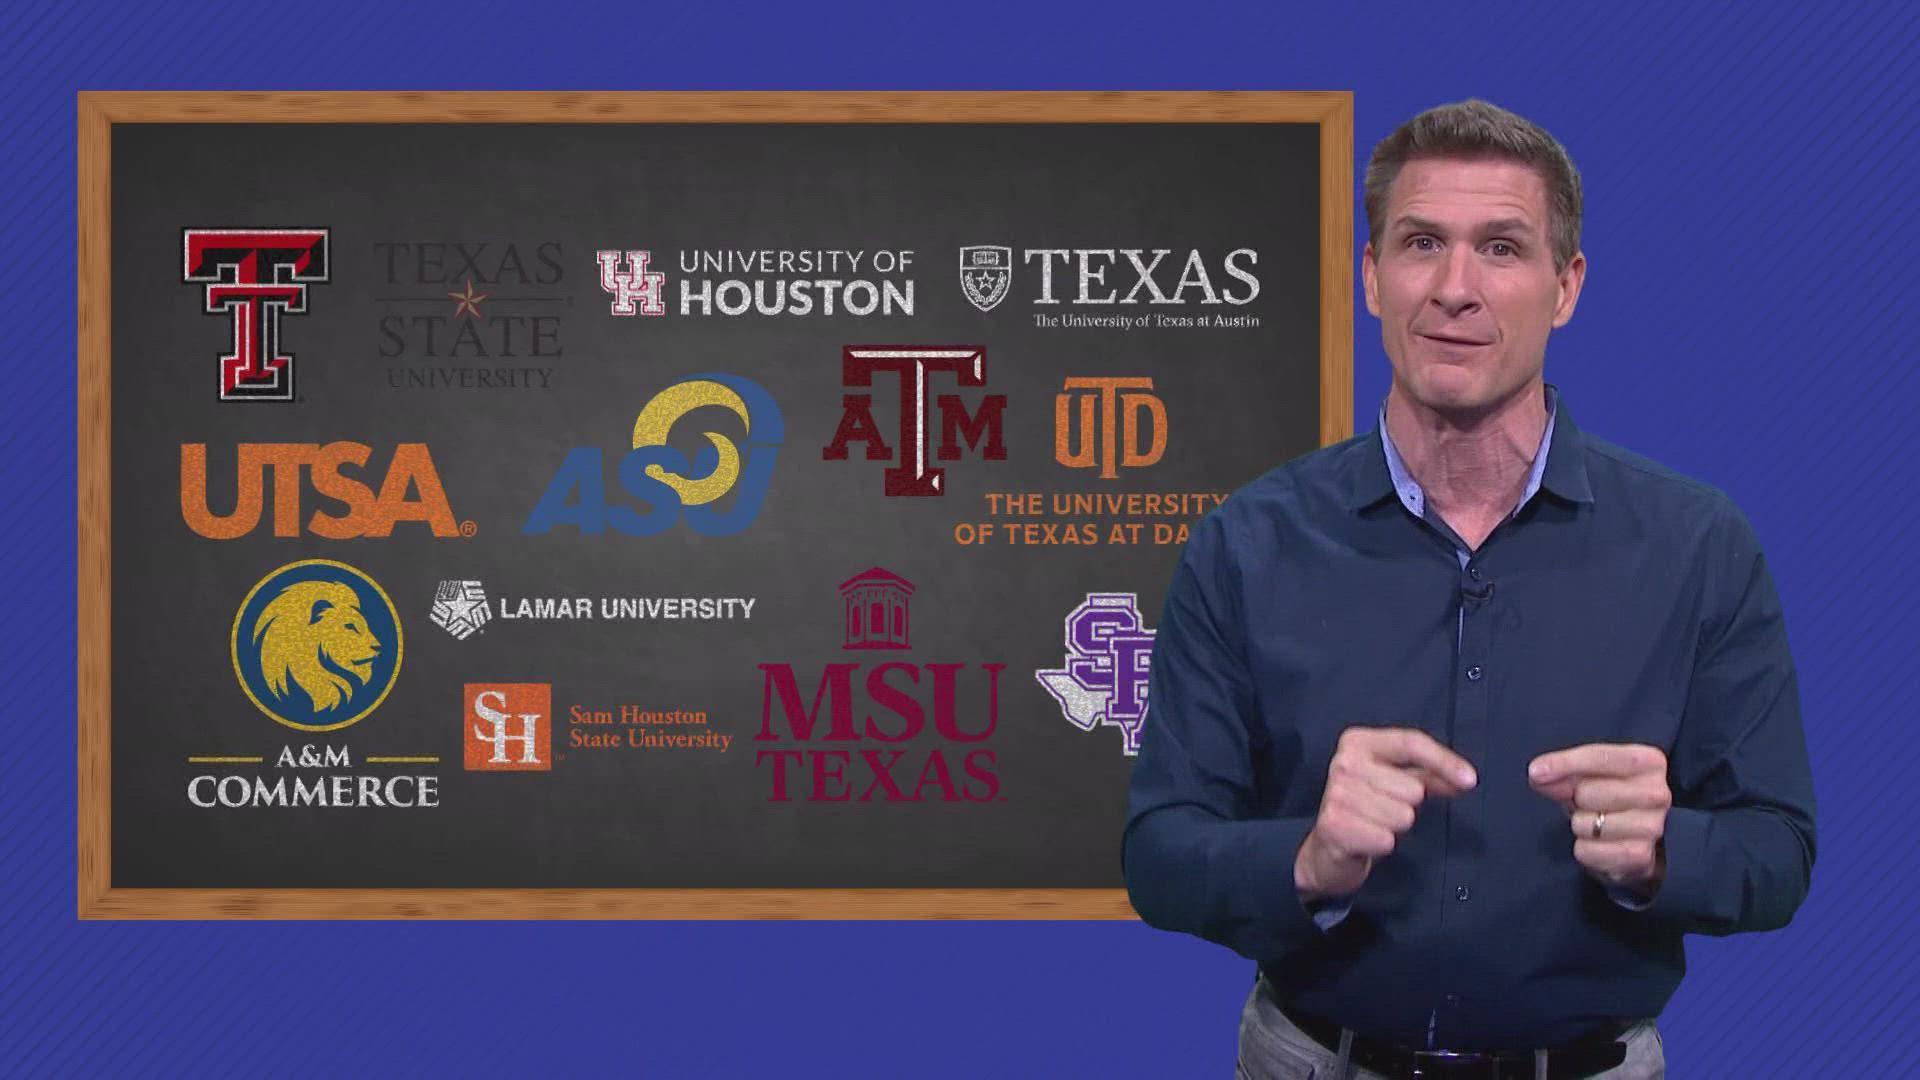 If your household makes under a certain amount of money, students from that household may be eligible at many Texas universities for free tuition.